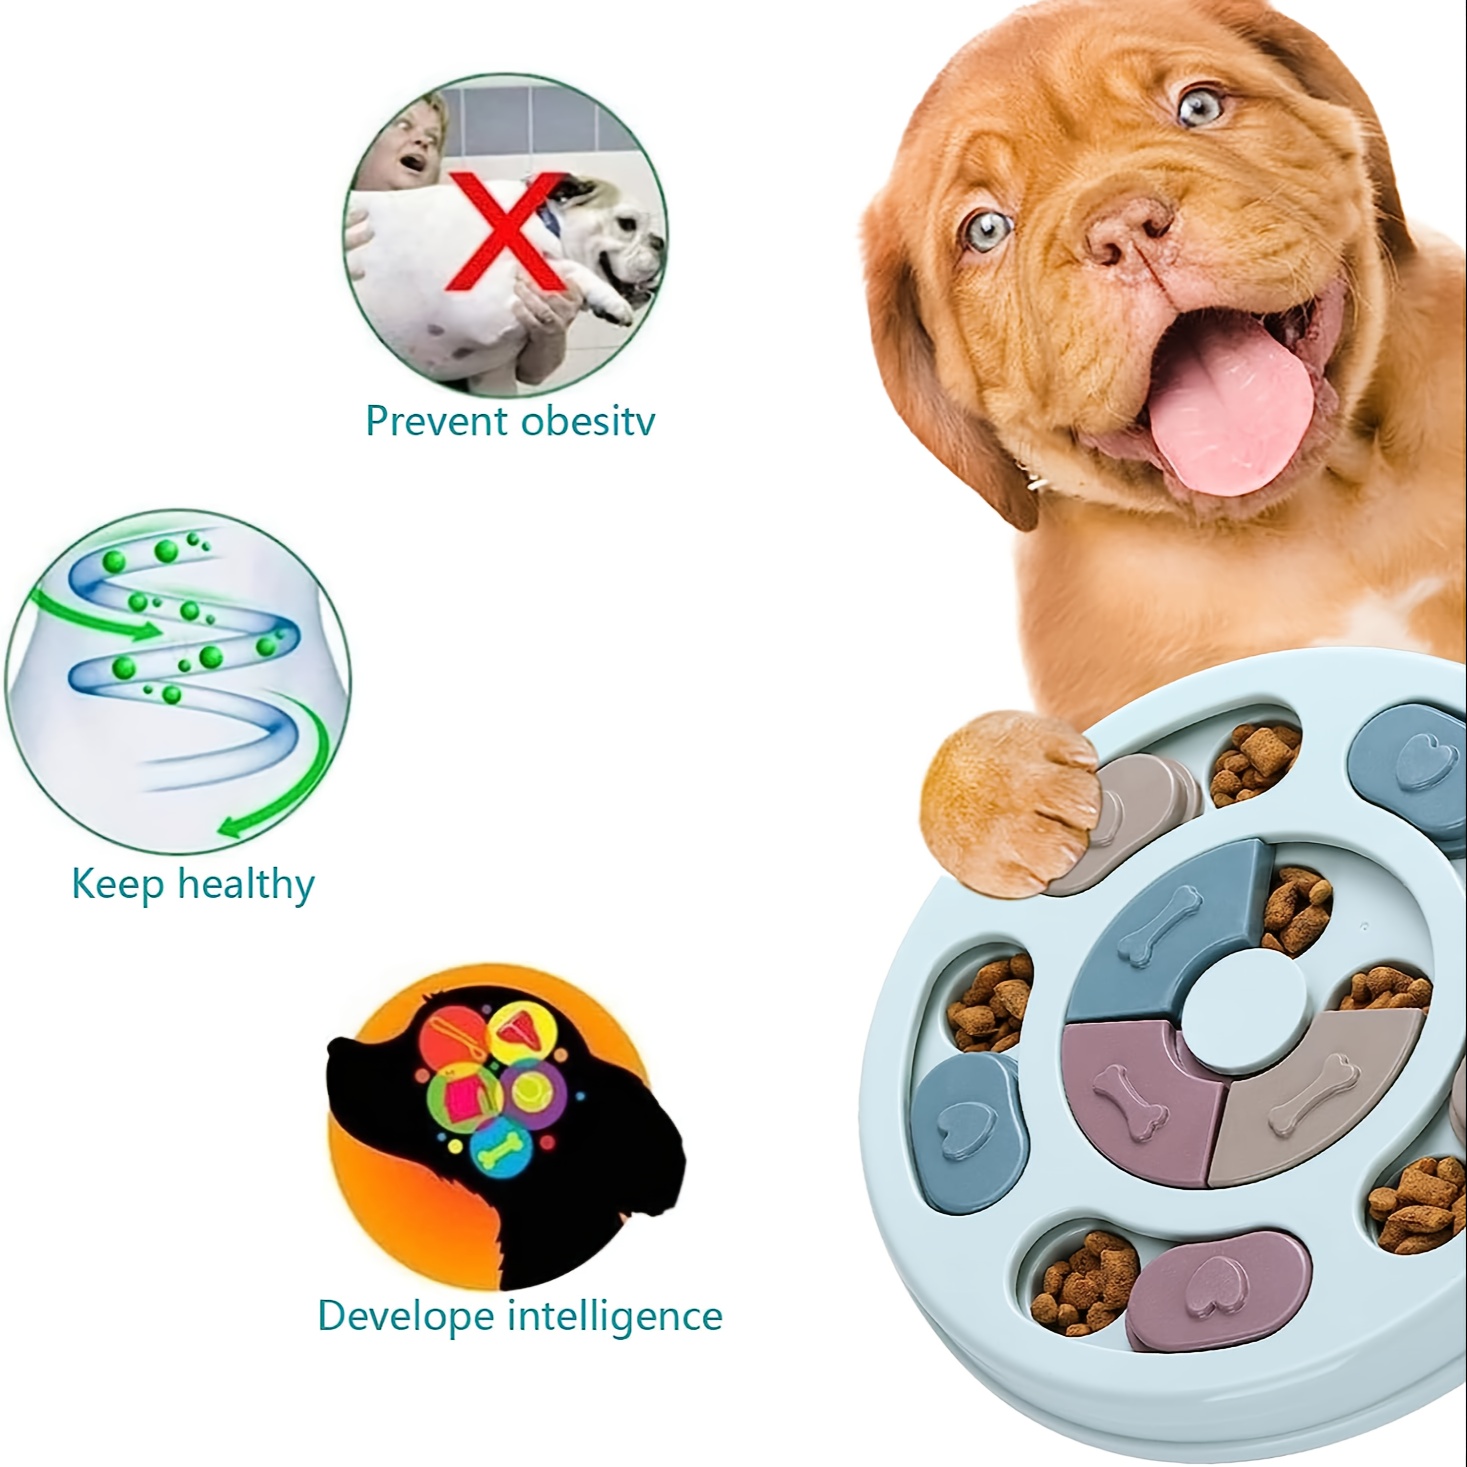 Dog Toys For Puppies, Interactive Dog Toys For Training, Dog Enrichment  Toys For Large Medium Small Smart Dogs, Pet Puzzles Toys For Dogs Mental  Stimu